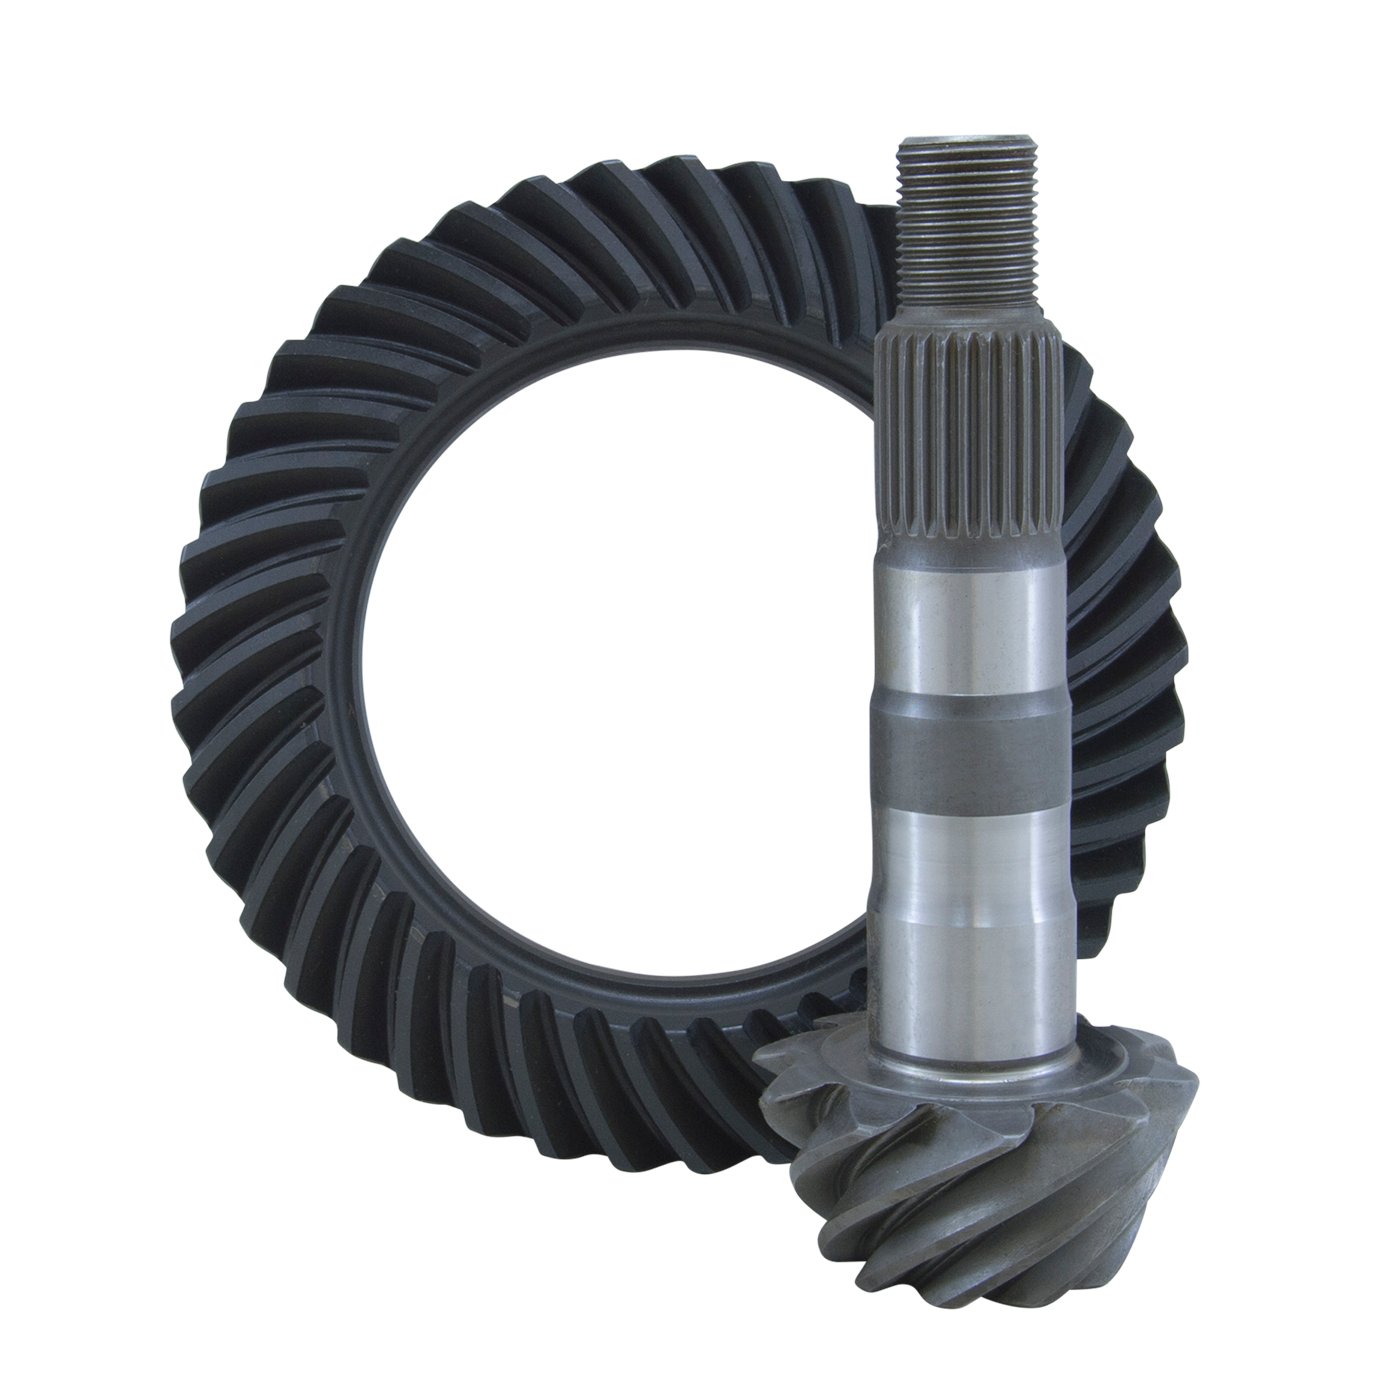 USA Standard 36415 Ring & Pinion Gear Set, For GM Ifs 7.2 in. (S10 & S15), 3.73 Ratio